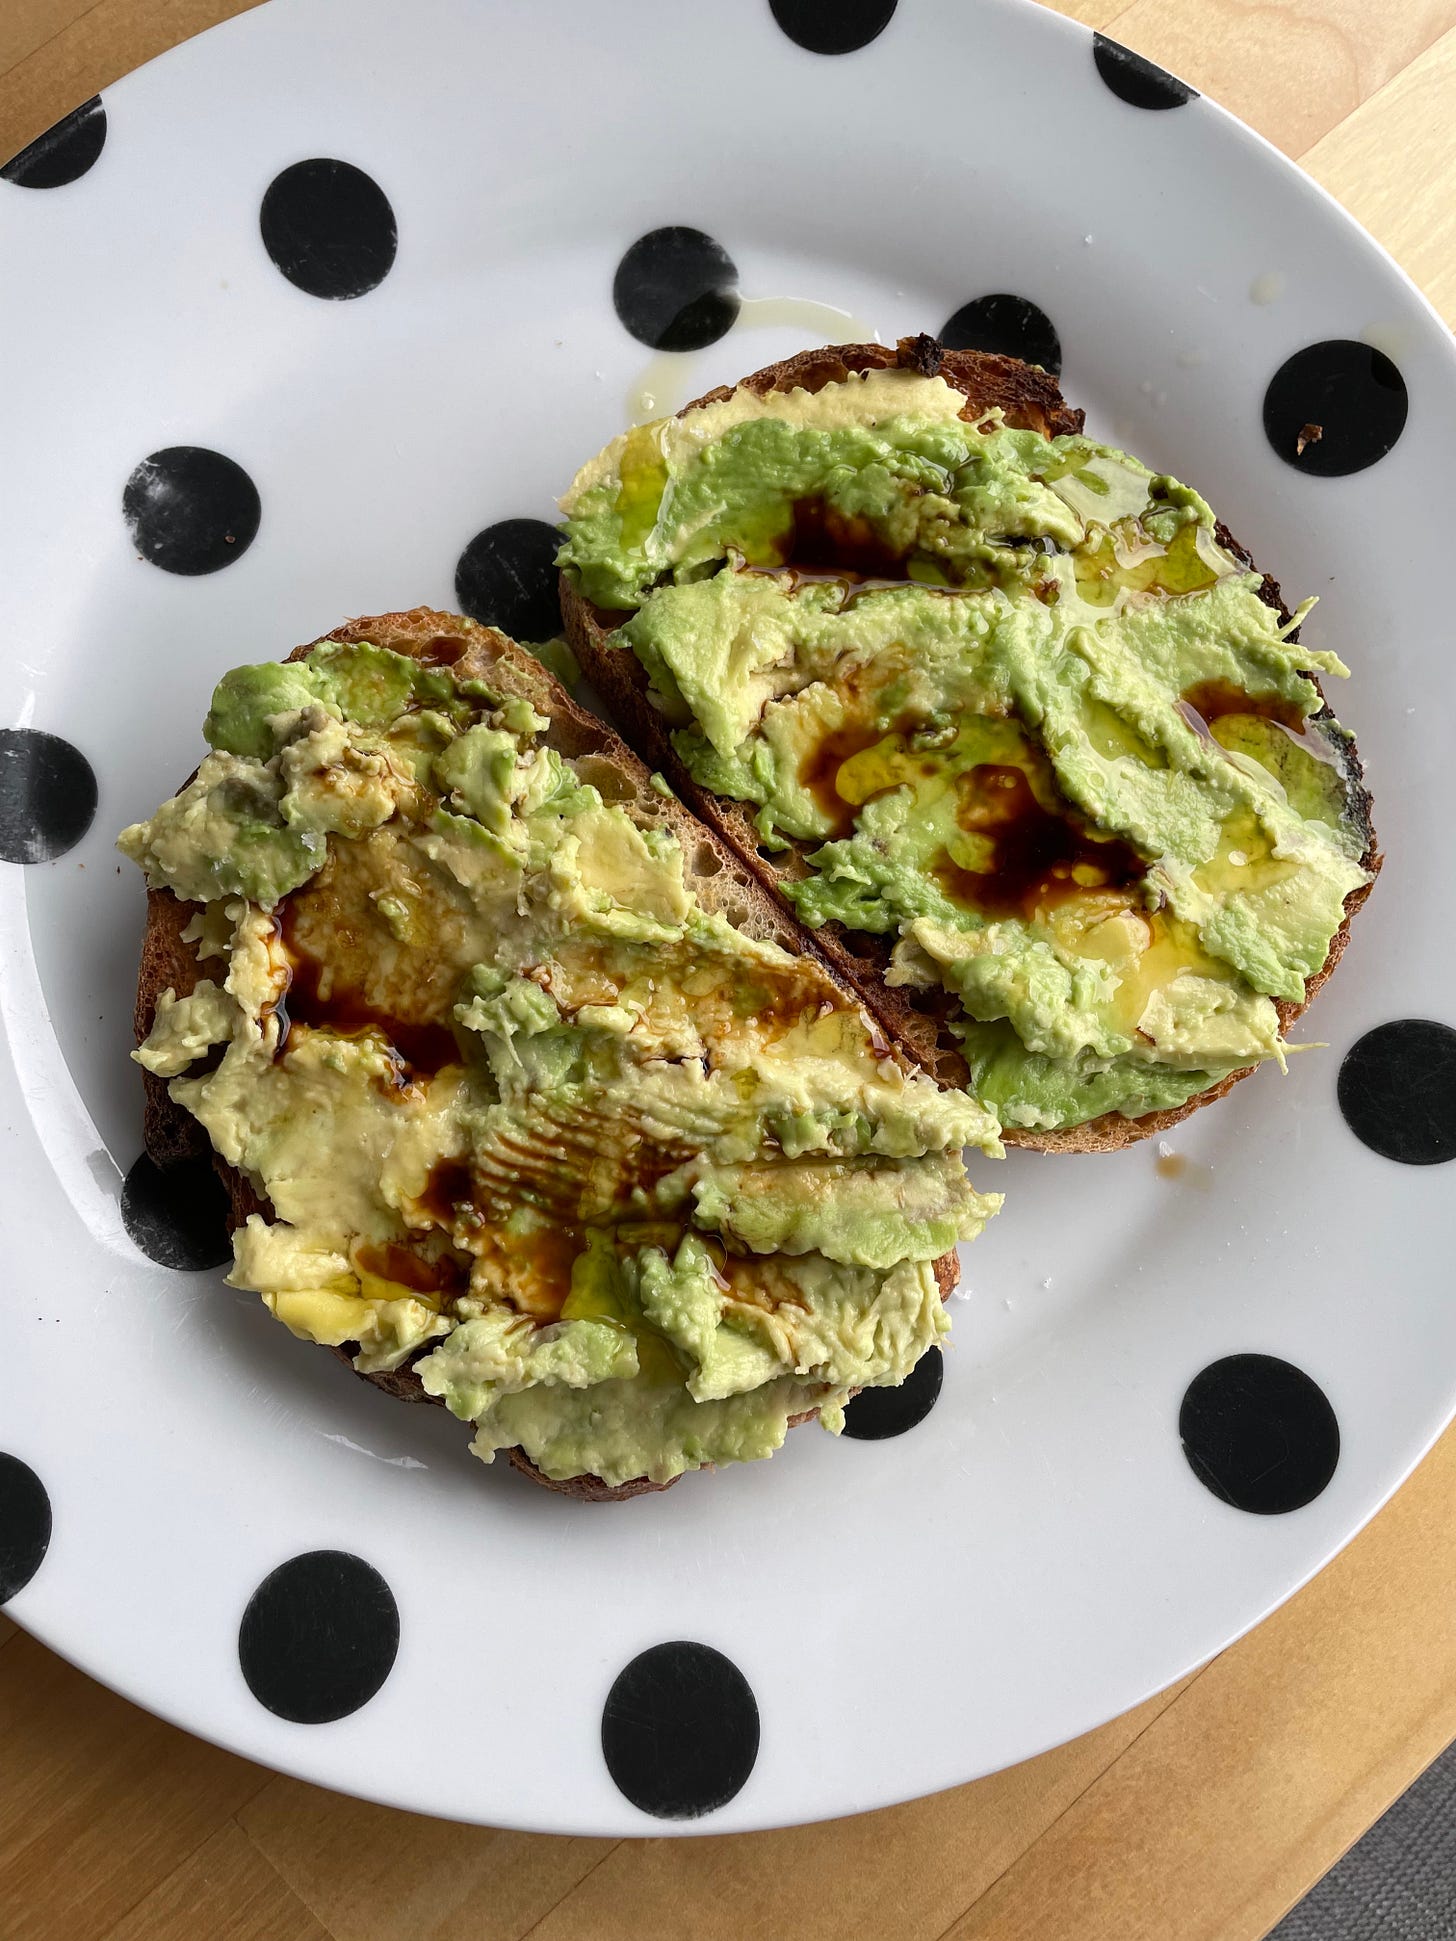 Avocado toast topped with balsamic vinegar and olive oil on a spotted plate.